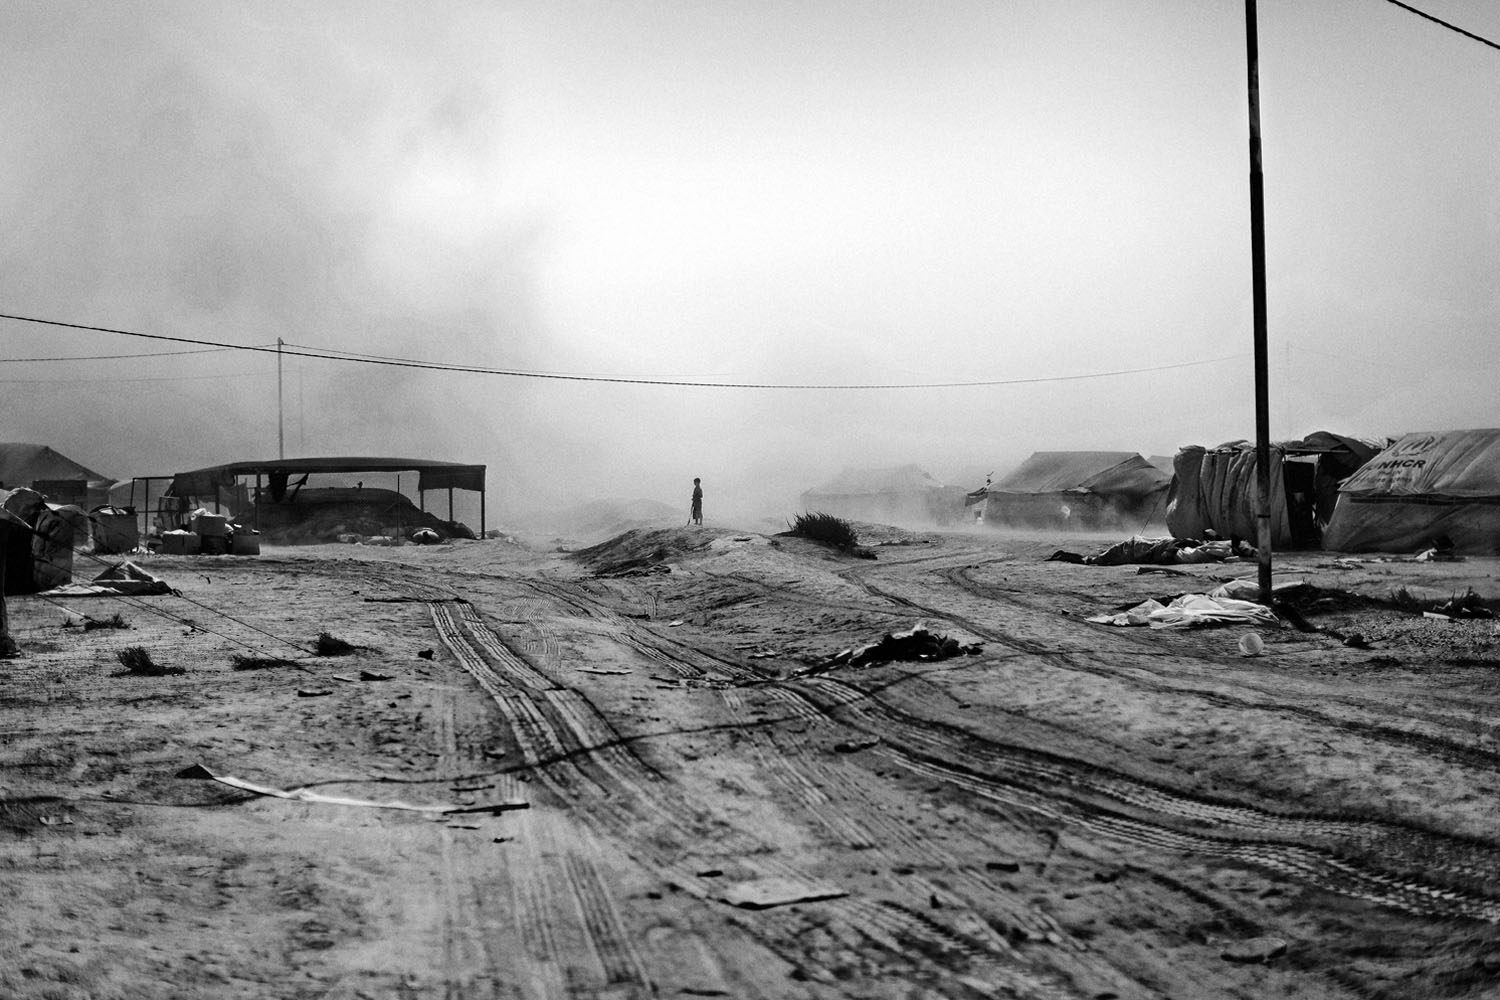 JORDAN, Zaatari. September 1, 2012.Dust sweeps over the Zaatari refugee camp near the Syrian border in Jordan. The camp was first opened in July 2012 to host the Syrians fleeing the violence that erupted in 2011 and 2012. As of late August 2012 the camp houses 15,000 Syrian refugees.Contact email:New York : photography@magnumphotos.comParis : magnum@magnumphotos.frLondon : magnum@magnumphotos.co.ukTokyo : tokyo@magnumphotos.co.jpContact phones:New York : +1 212 929 6000Paris: + 33 1 53 42 50 00London: + 44 20 7490 1771Tokyo: + 81 3 3219 0771Image URL:http://www.magnumphotos.com/Archive/C.aspx?VP3=ViewBox_VPage&IID=2K7O3RKHMV0Z&CT=Image&IT=ZoomImage01_VForm